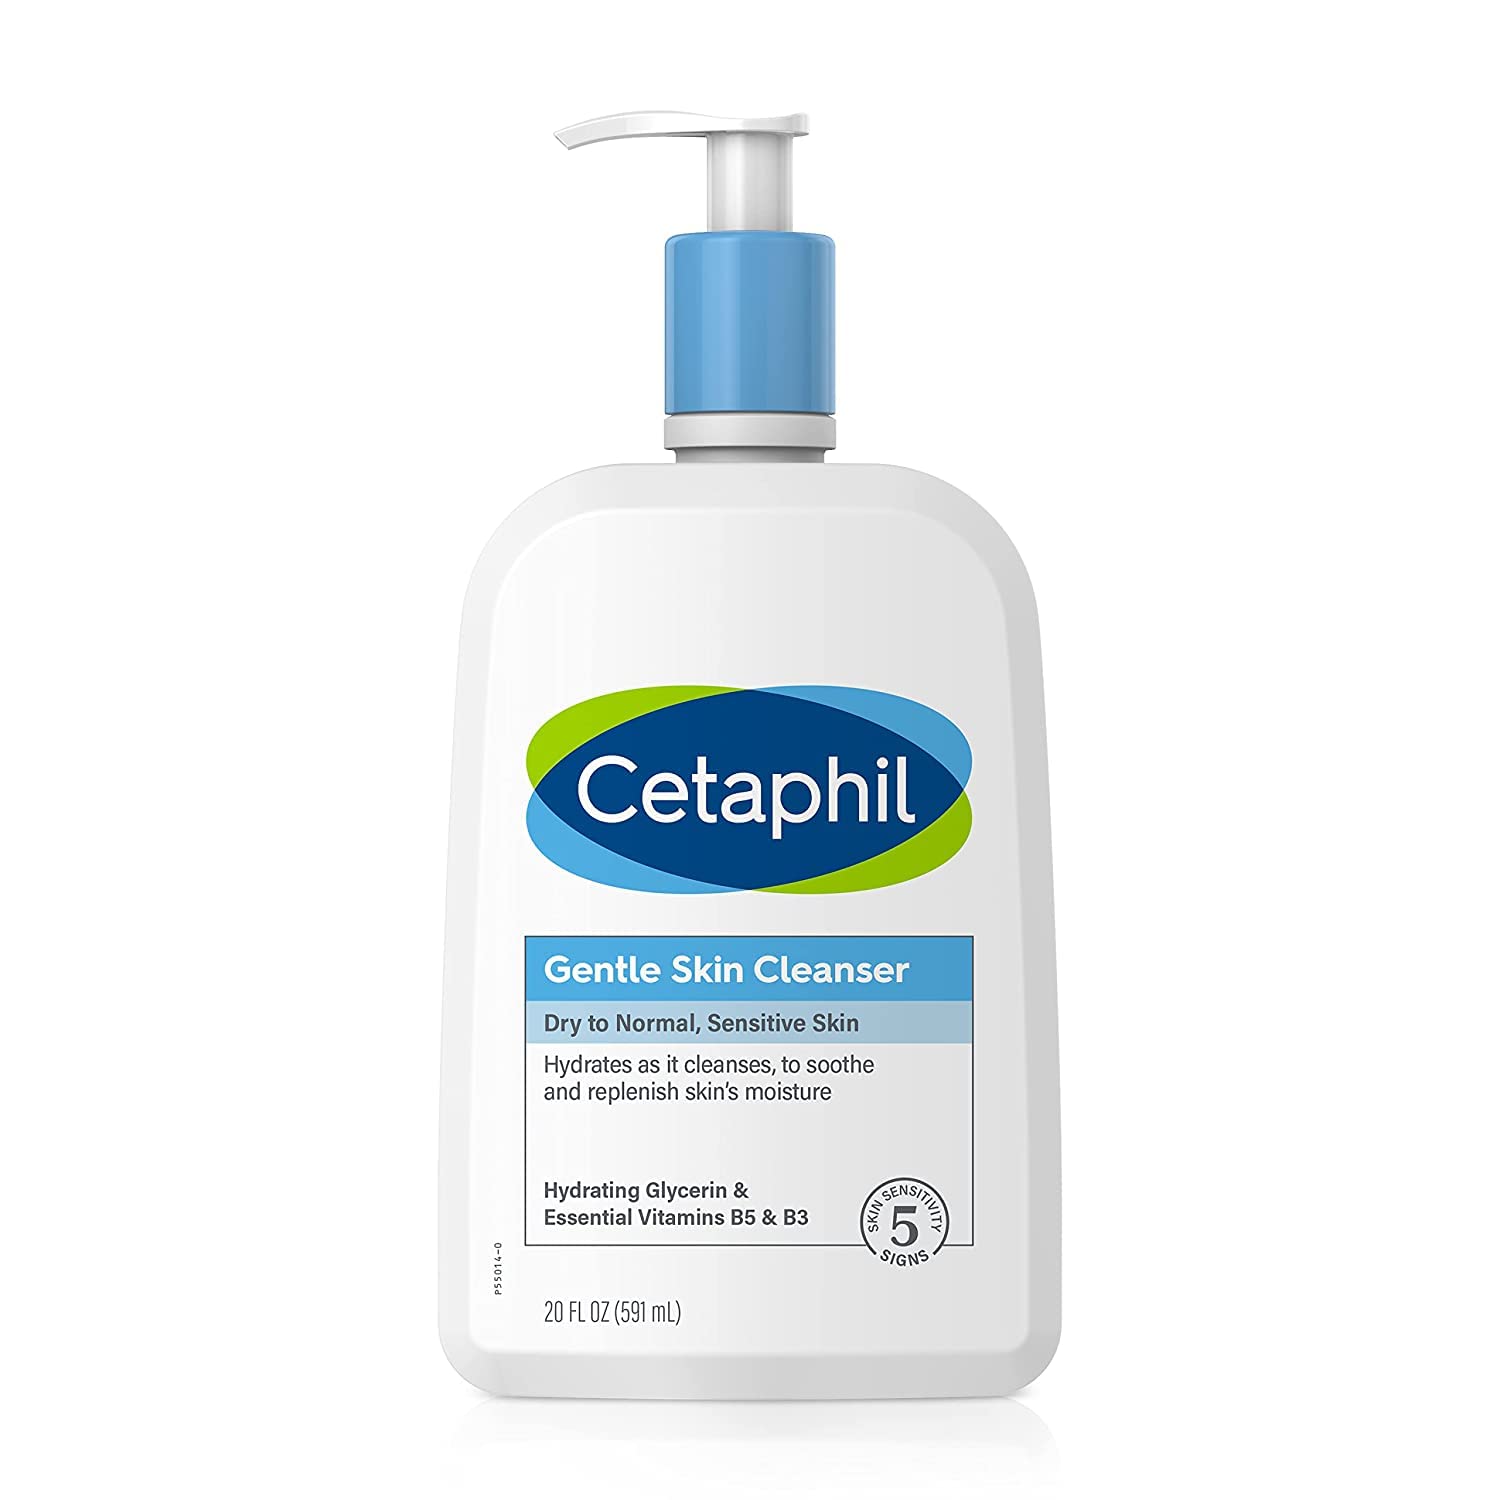 CETAPHIL Gentle Skin Cleanser 20 fl oz, Hydrating Face Wash & Body Wash, Ideal For Sensitive, Dry Skin, Non-irritating, Wont Clog Pores, Fragrance-free, Soap-free, Dermatologist Recommended